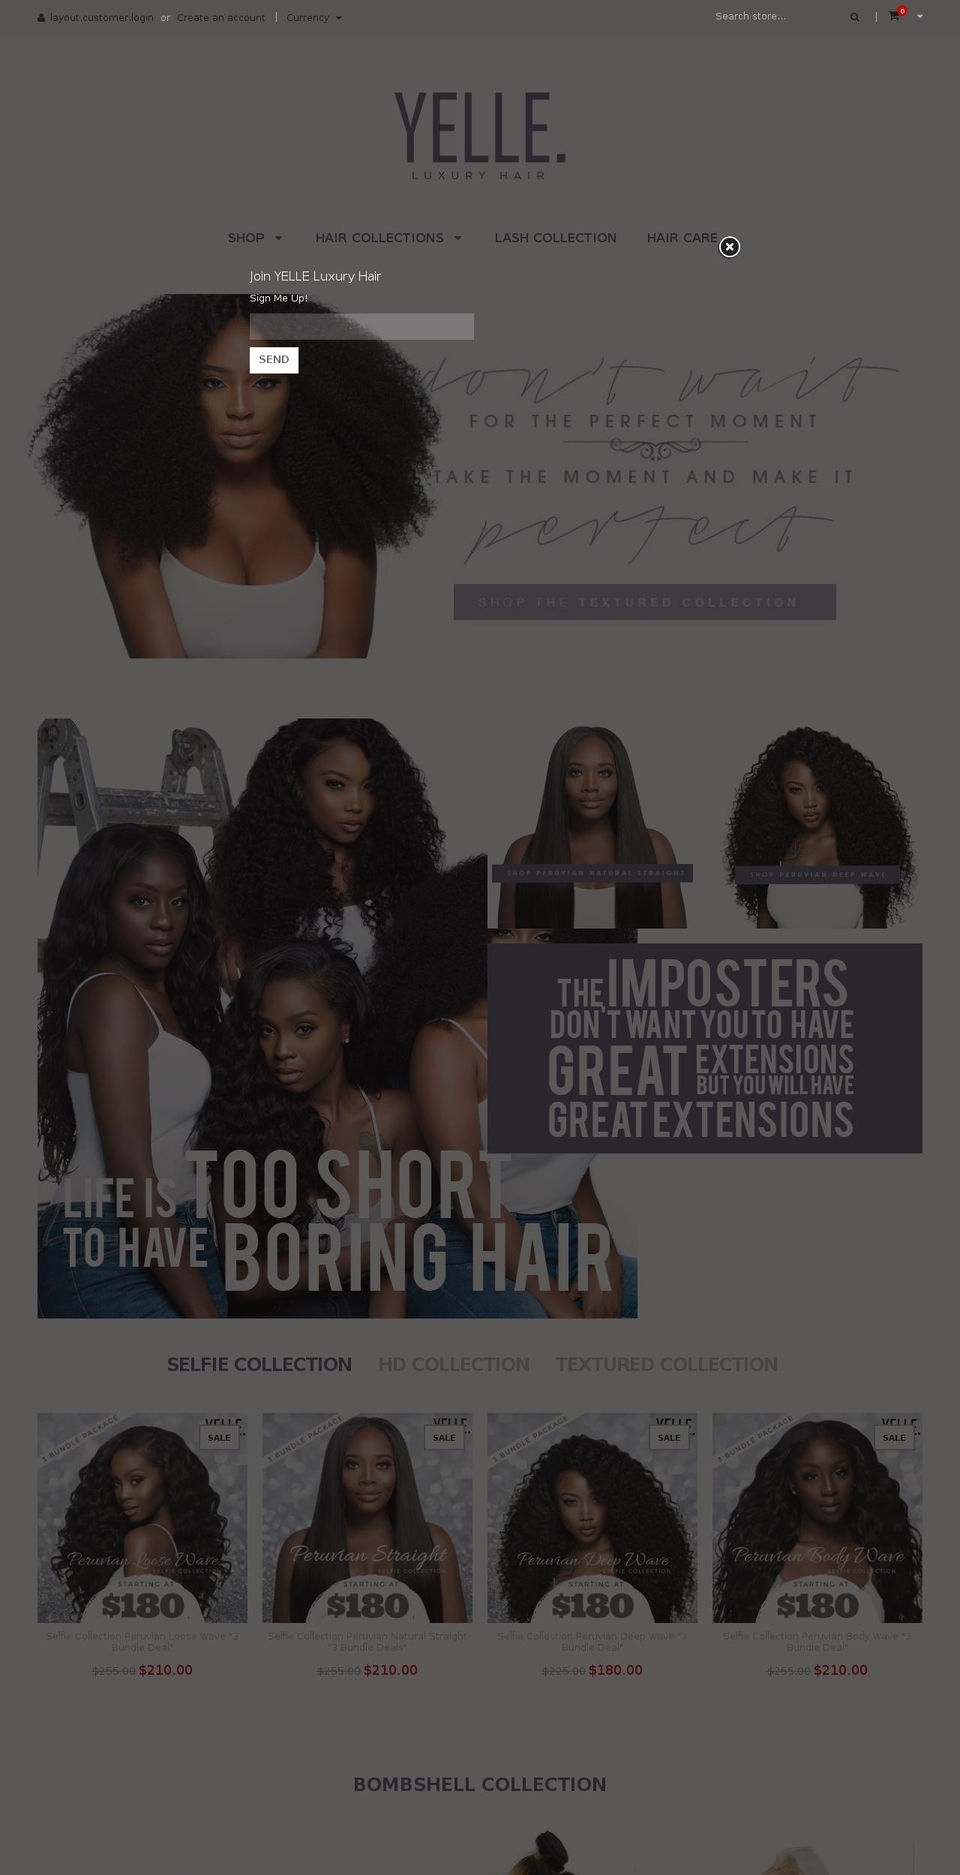 anormy-full-r34 Shopify theme site example yelleluxuryhair.com